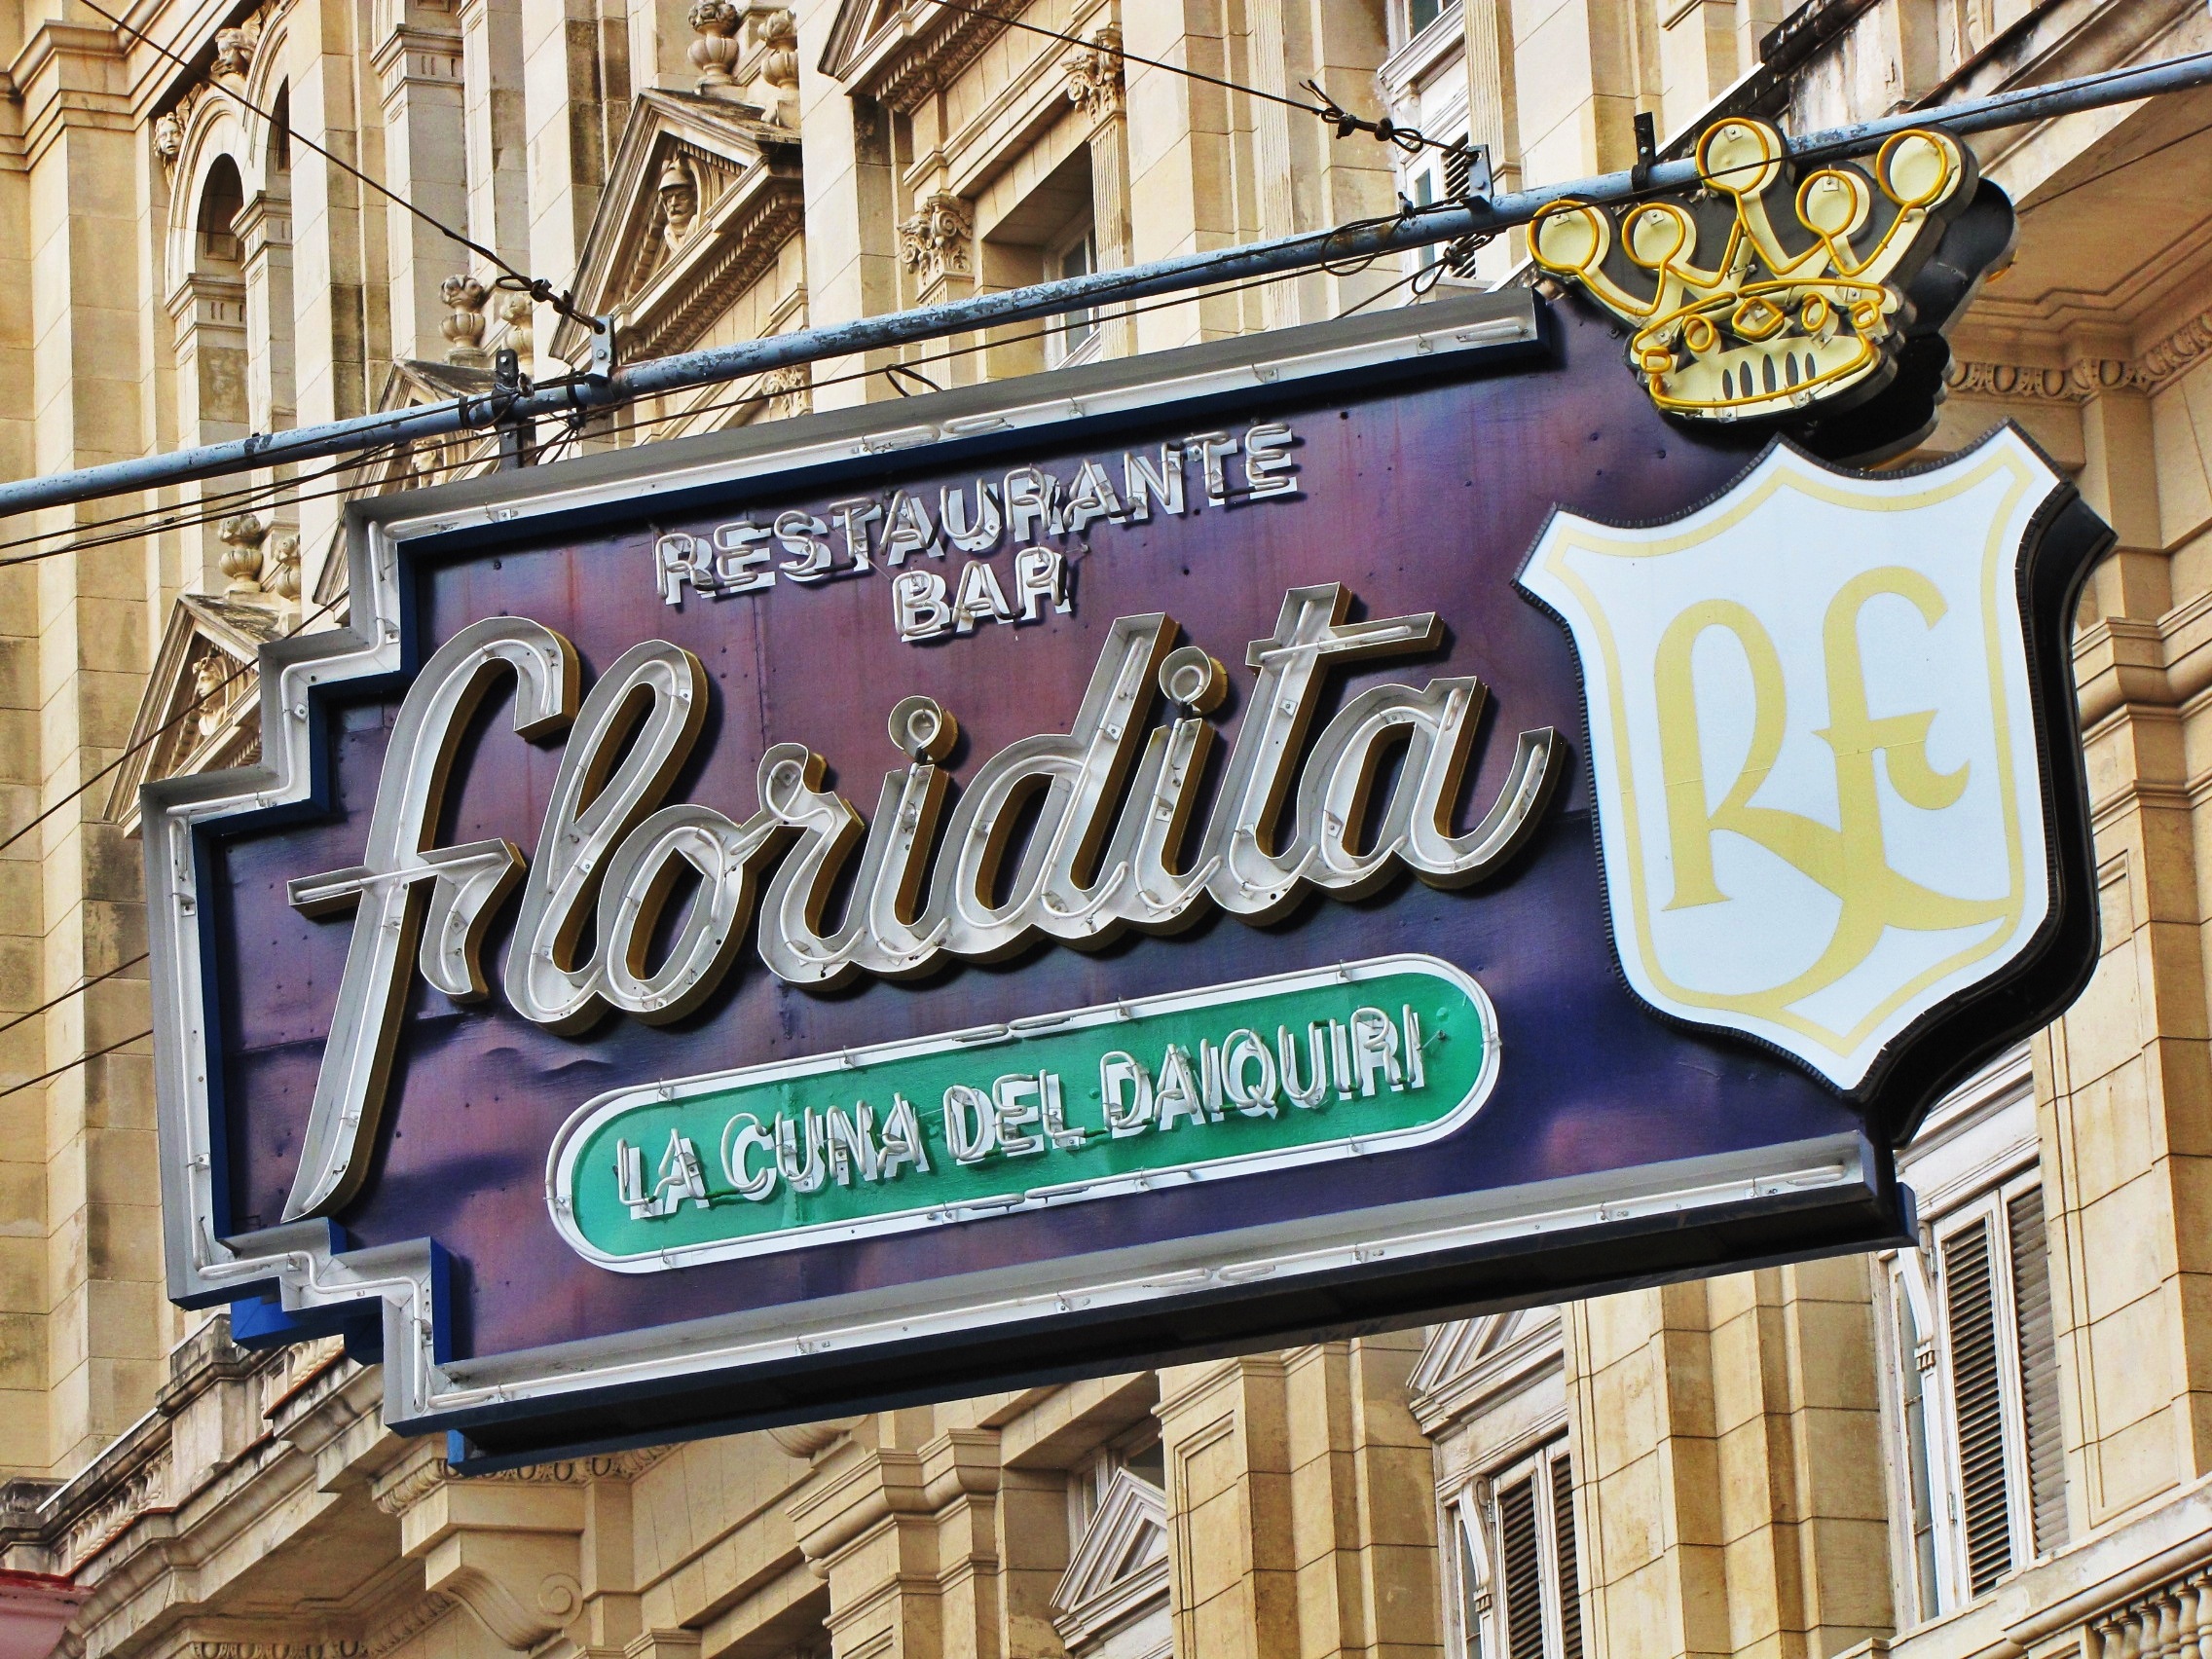 Floridita. Image: Laura Bly / Flickr